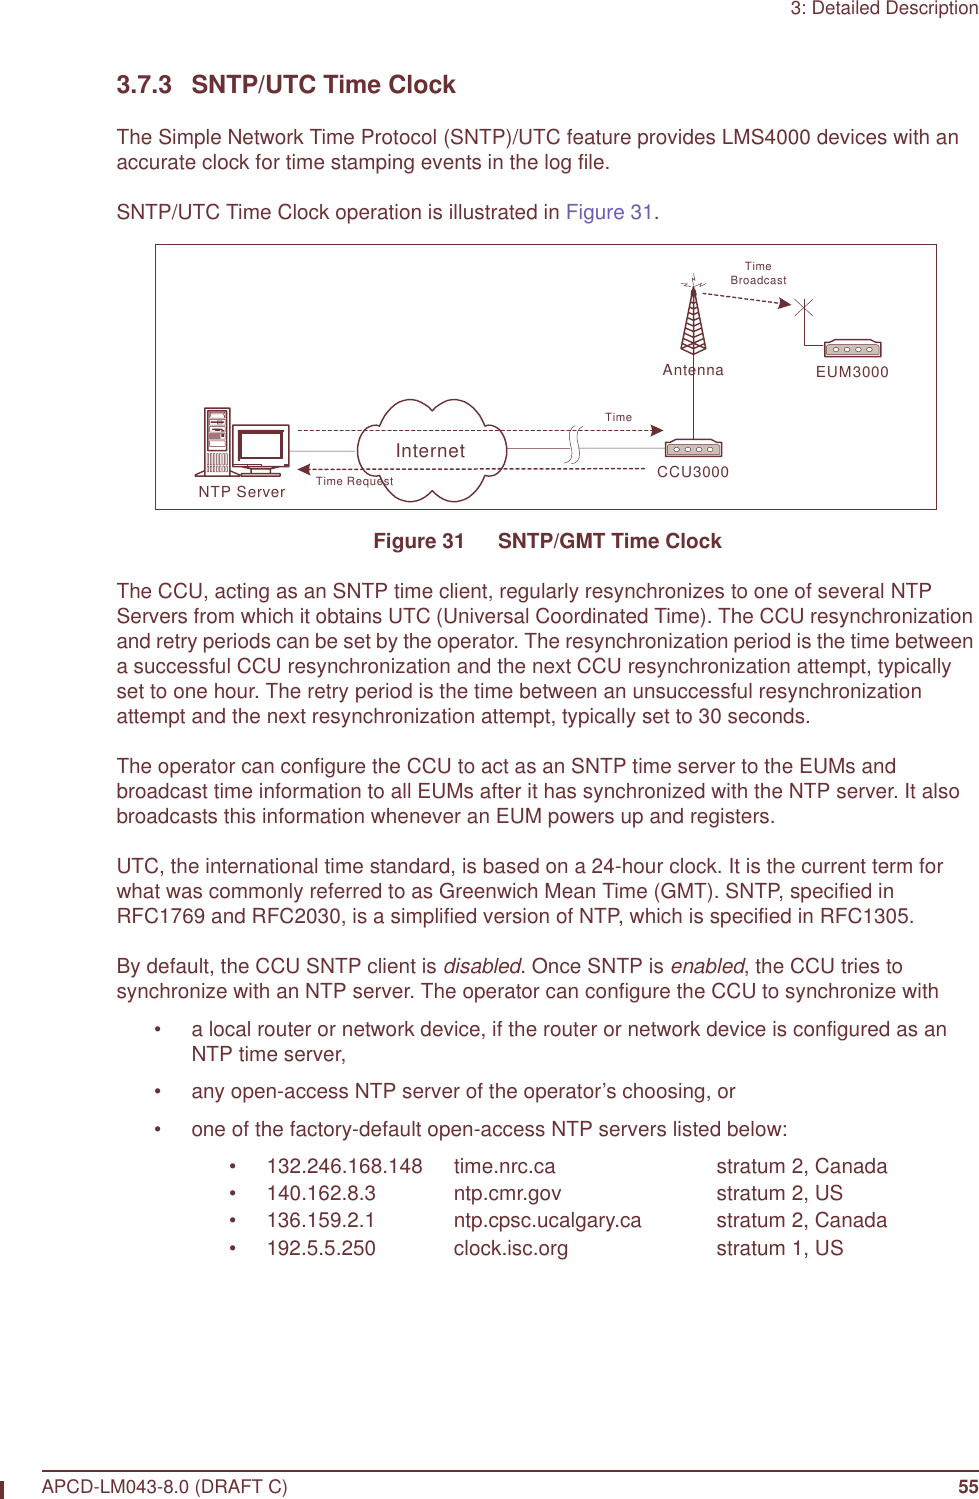 3: Detailed DescriptionAPCD-LM043-8.0 (DRAFT C) 553.7.3 SNTP/UTC Time ClockThe Simple Network Time Protocol (SNTP)/UTC feature provides LMS4000 devices with an accurate clock for time stamping events in the log file.SNTP/UTC Time Clock operation is illustrated in Figure 31.Figure 31   SNTP/GMT Time ClockThe CCU, acting as an SNTP time client, regularly resynchronizes to one of several NTP Servers from which it obtains UTC (Universal Coordinated Time). The CCU resynchronization and retry periods can be set by the operator. The resynchronization period is the time between a successful CCU resynchronization and the next CCU resynchronization attempt, typically set to one hour. The retry period is the time between an unsuccessful resynchronization attempt and the next resynchronization attempt, typically set to 30 seconds. The operator can configure the CCU to act as an SNTP time server to the EUMs and broadcast time information to all EUMs after it has synchronized with the NTP server. It also broadcasts this information whenever an EUM powers up and registers.UTC, the international time standard, is based on a 24-hour clock. It is the current term for what was commonly referred to as Greenwich Mean Time (GMT). SNTP, specified in RFC1769 and RFC2030, is a simplified version of NTP, which is specified in RFC1305.By default, the CCU SNTP client is disabled. Once SNTP is enabled, the CCU tries to synchronize with an NTP server. The operator can configure the CCU to synchronize with• a local router or network device, if the router or network device is configured as an NTP time server,• any open-access NTP server of the operator’s choosing, or• one of the factory-default open-access NTP servers listed below:• 132.246.168.148 time.nrc.ca stratum 2, Canada• 140.162.8.3 ntp.cmr.gov stratum 2, US• 136.159.2.1 ntp.cpsc.ucalgary.ca stratum 2, Canada• 192.5.5.250 clock.isc.org stratum 1, USCCU3000Antenna EUM3000NTP ServerInternetTime RequestTimeTimeBroadcast